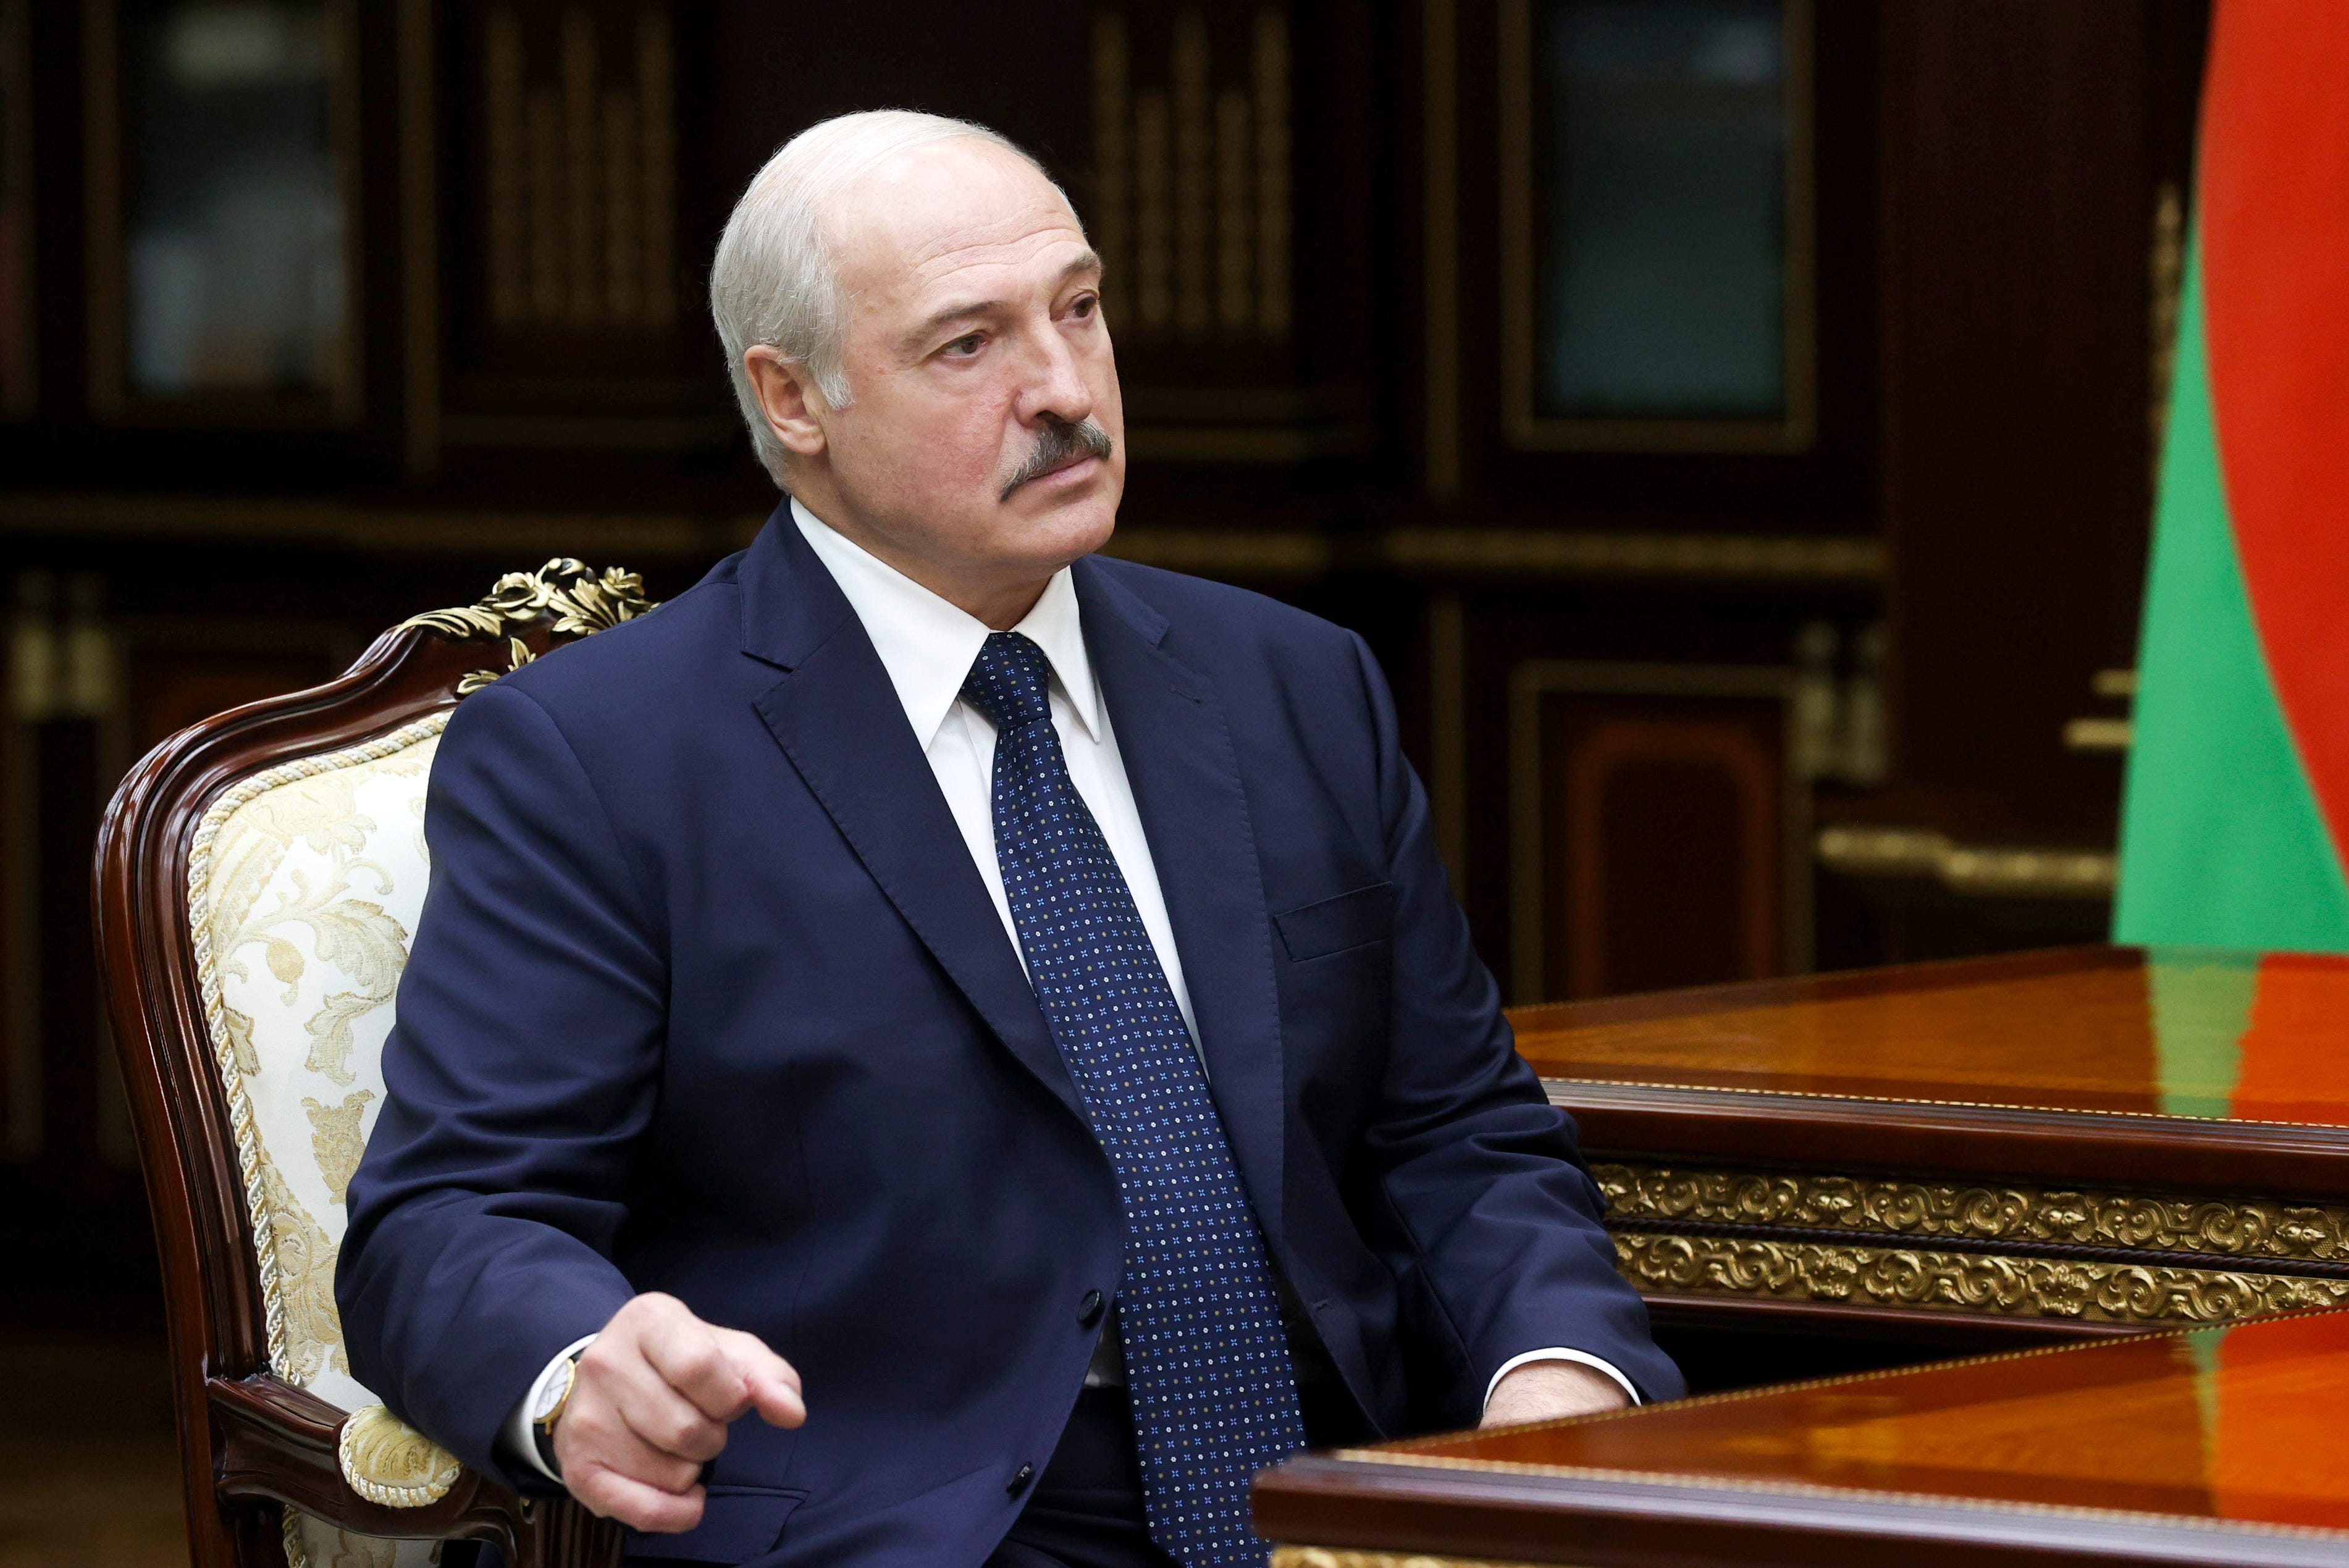 Belarusian President Alexander Lukashenko listens to the head of the Investigative Committee Ivan Naskevich during their meeting in Minsk, Belarus, on Sept. 7, 2020.